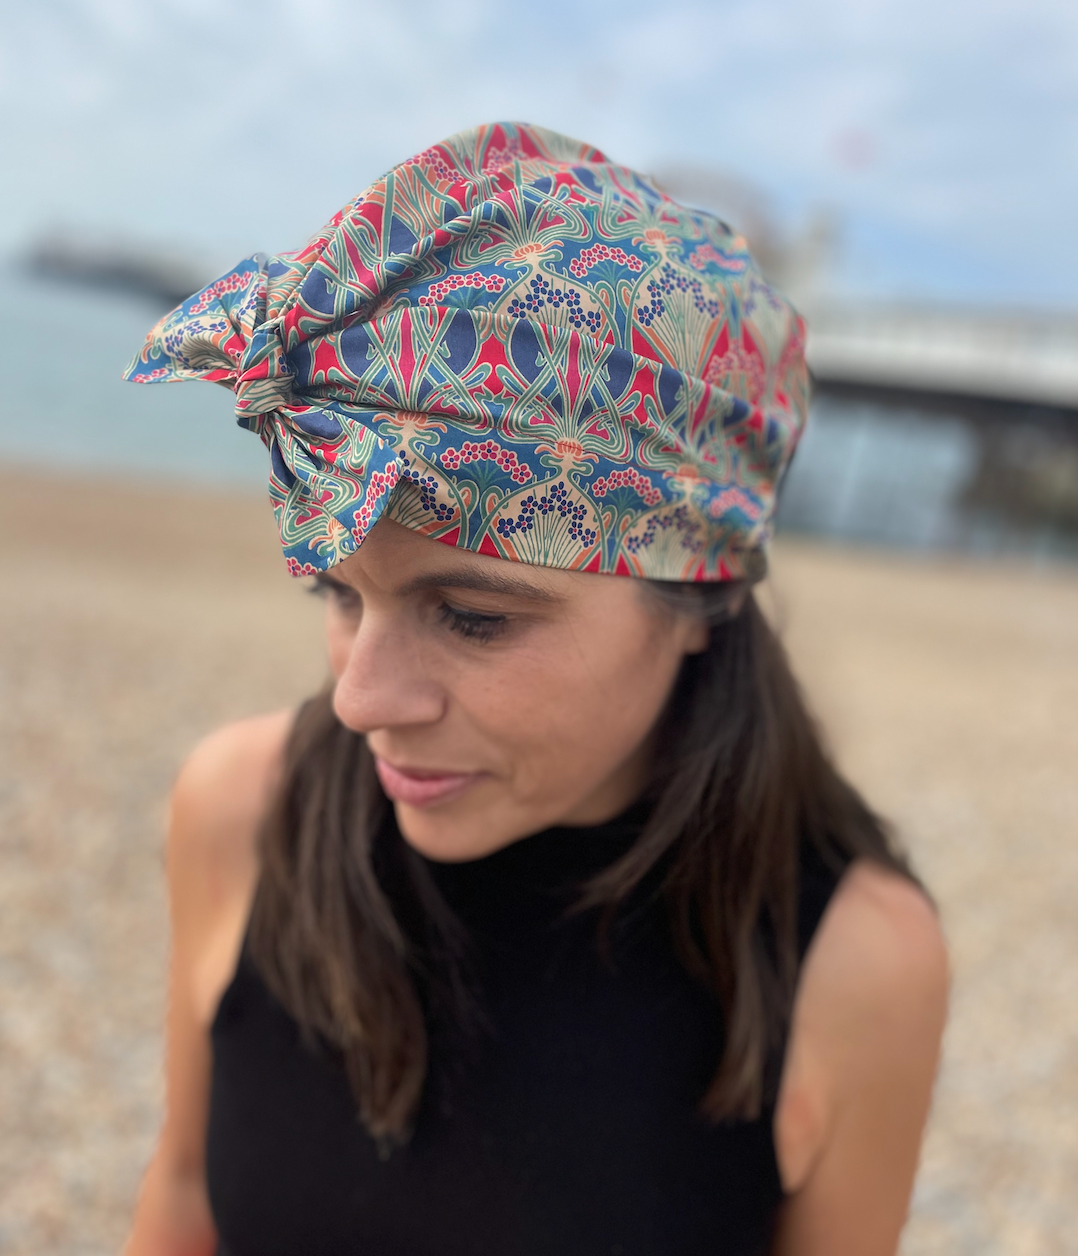 Ladies Turban Hat - Liberty of London Ianthe in Red